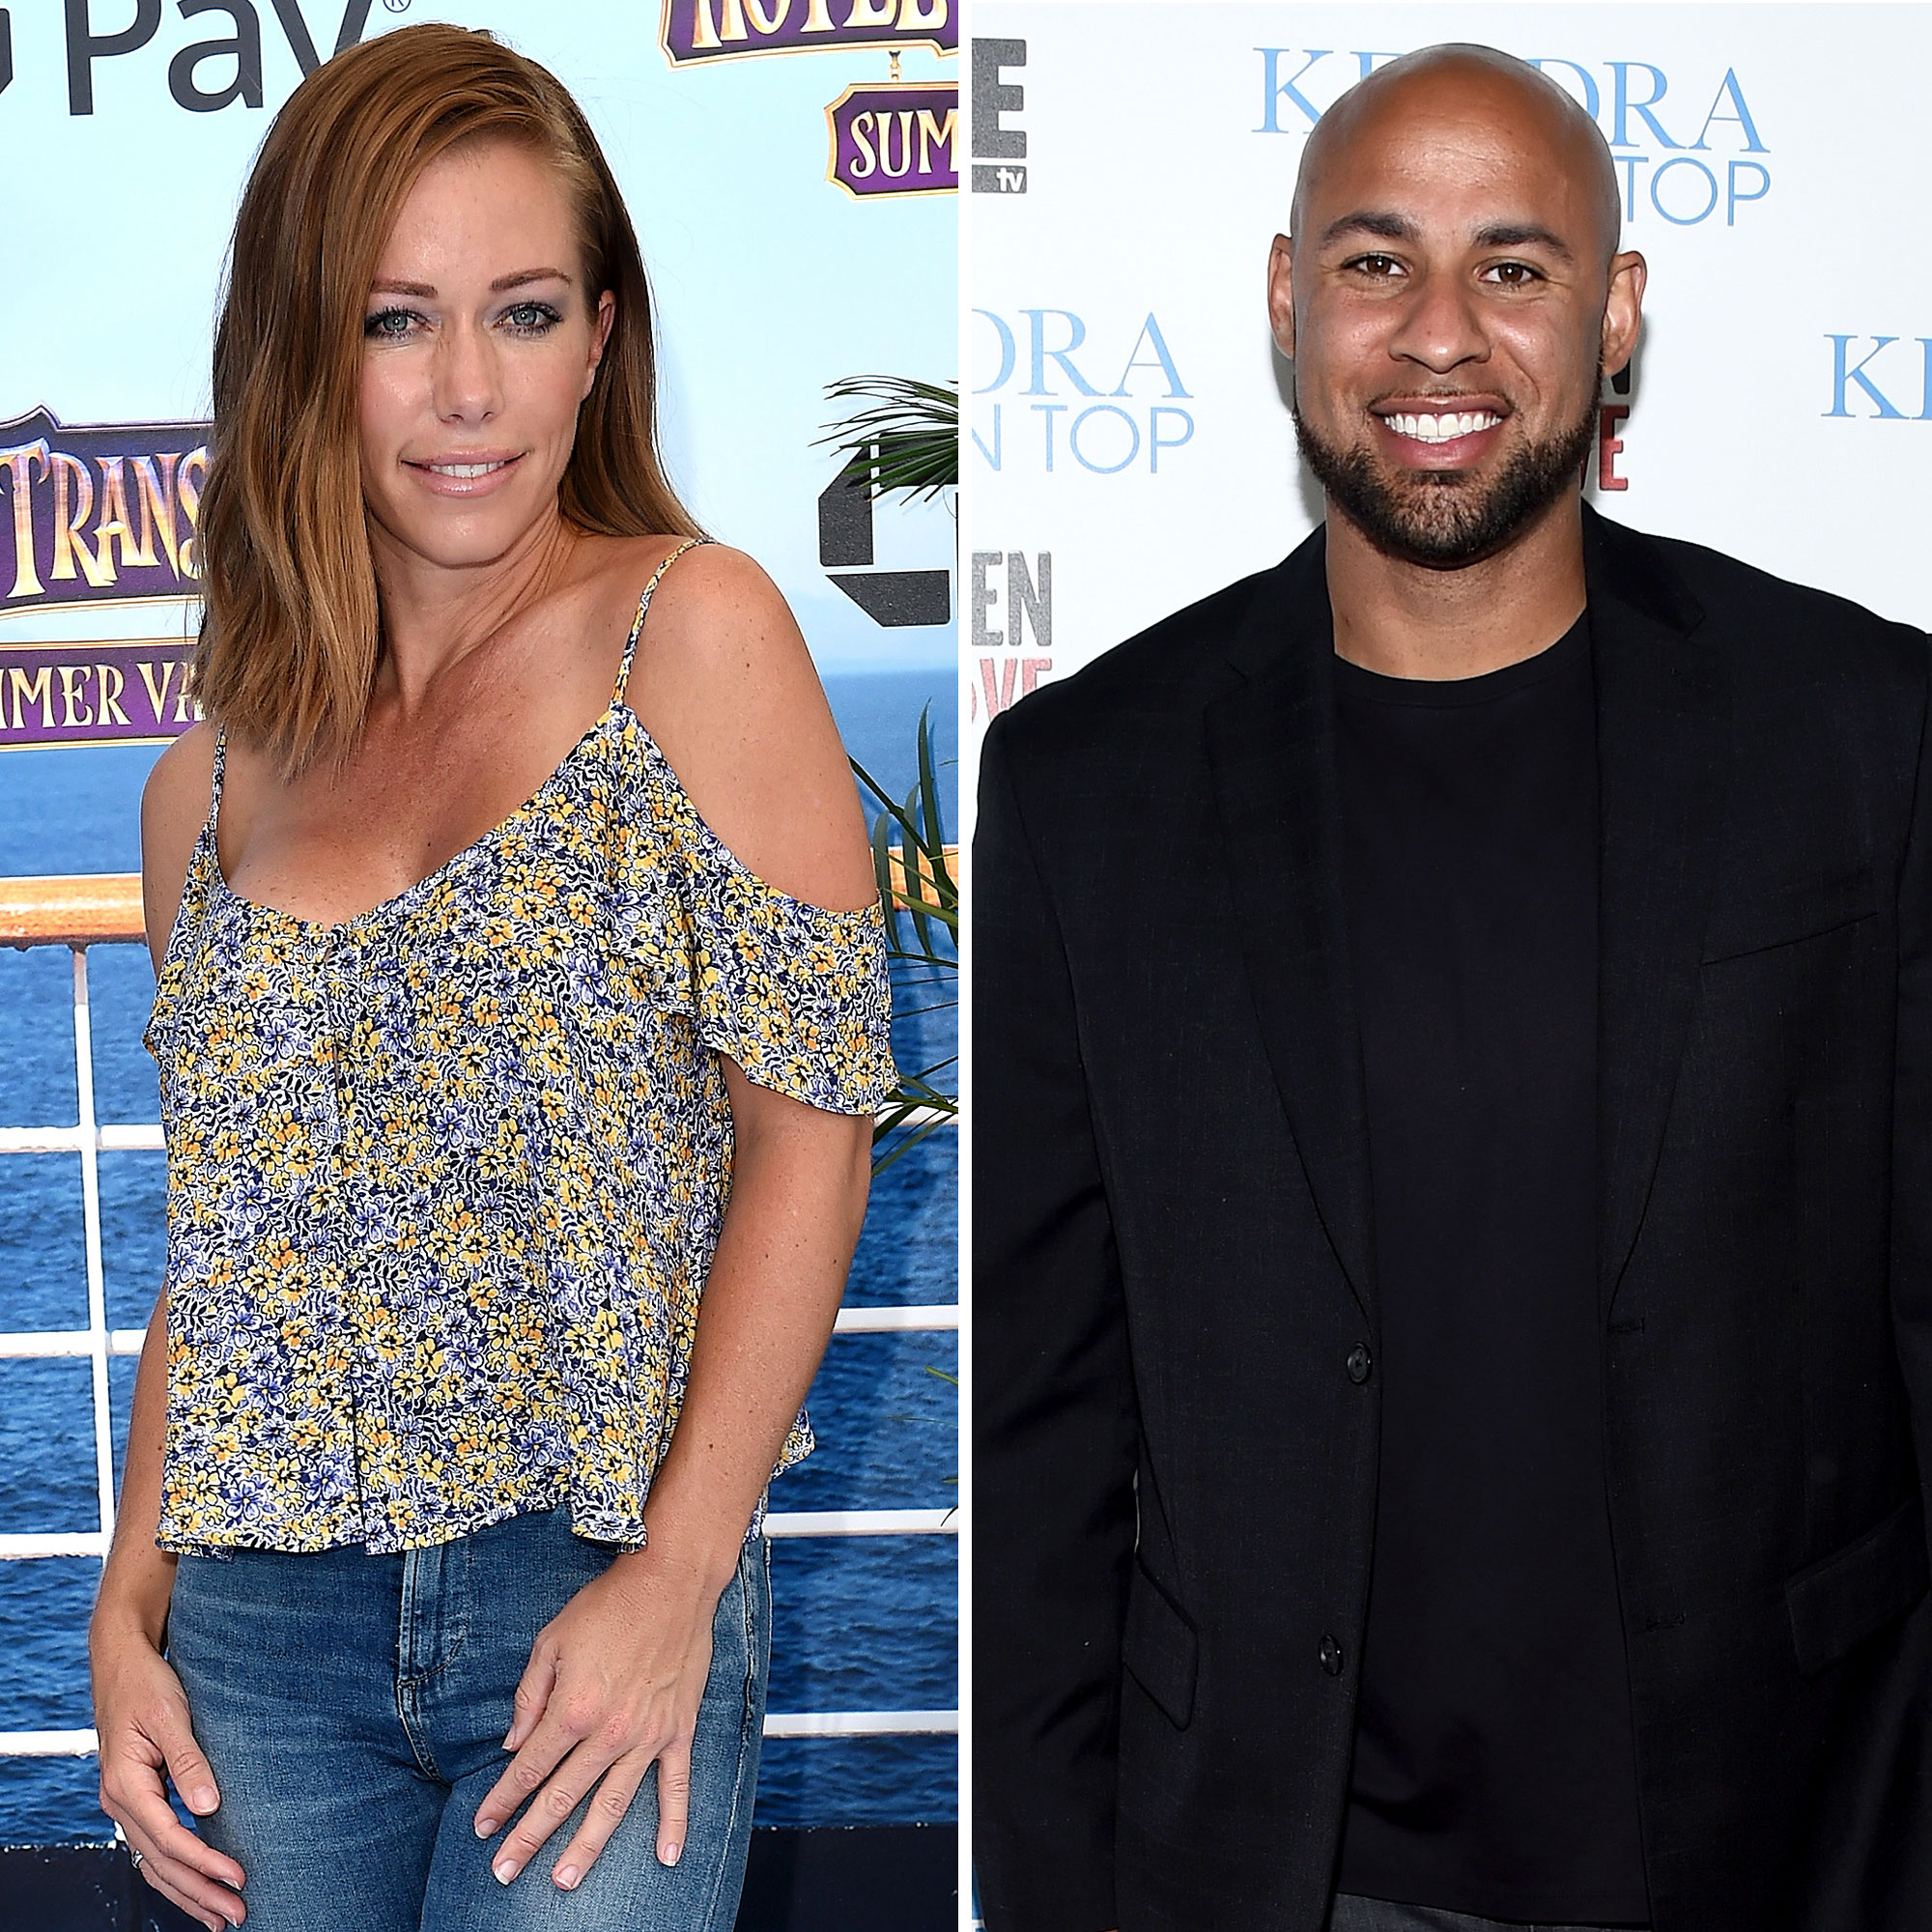 Kendra Wilkinson and Hank Baskett Settle Their Divorce pic picture